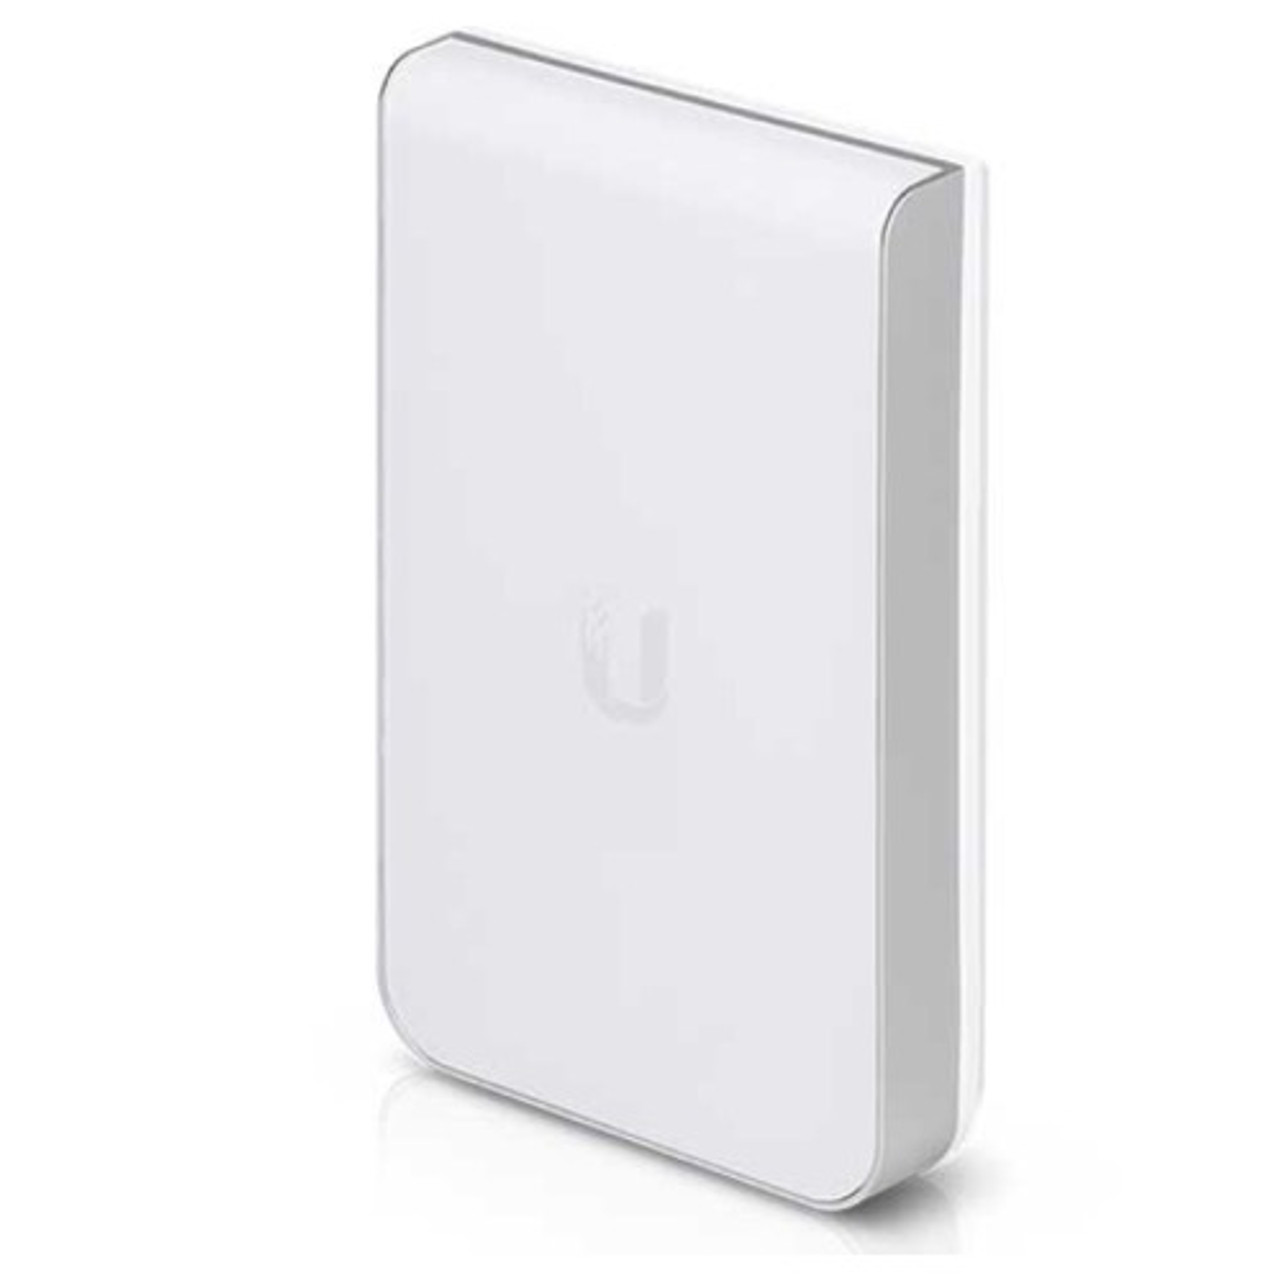 UniFi AC In-Wall Pro Access Point, UAP-AC-IW-PRO-US